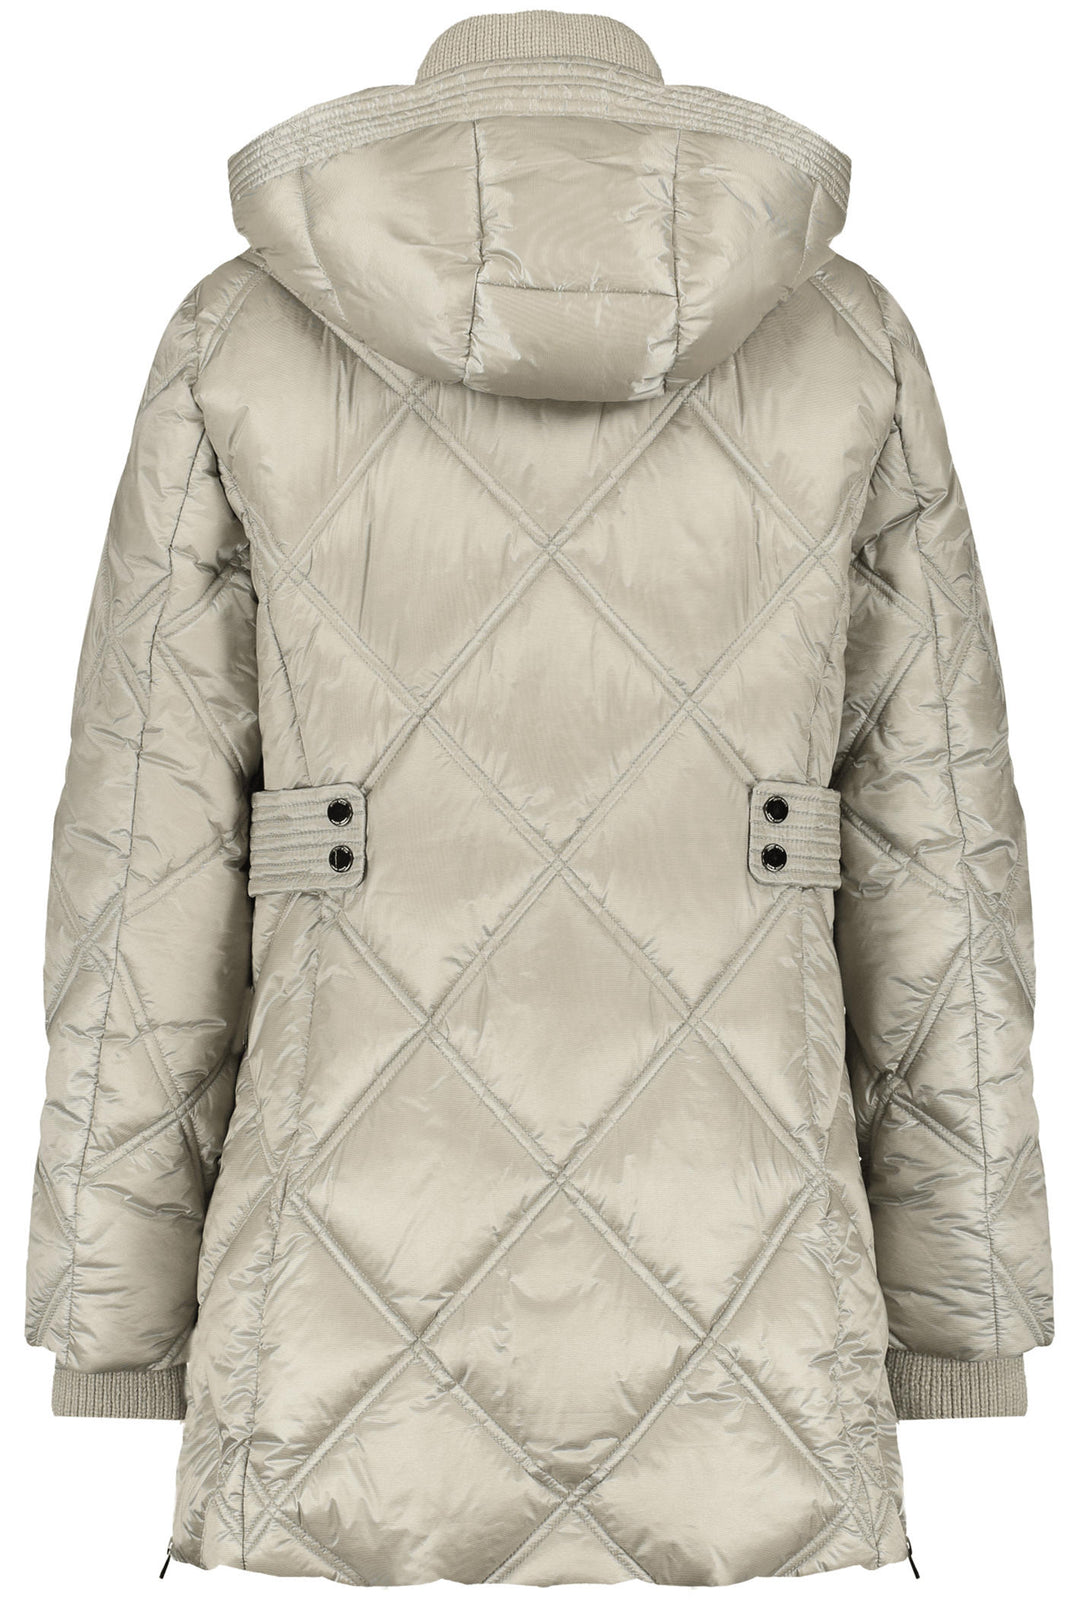 Gerry Weber 250221 Ivory Longline Padded Coat - Experience Boutique